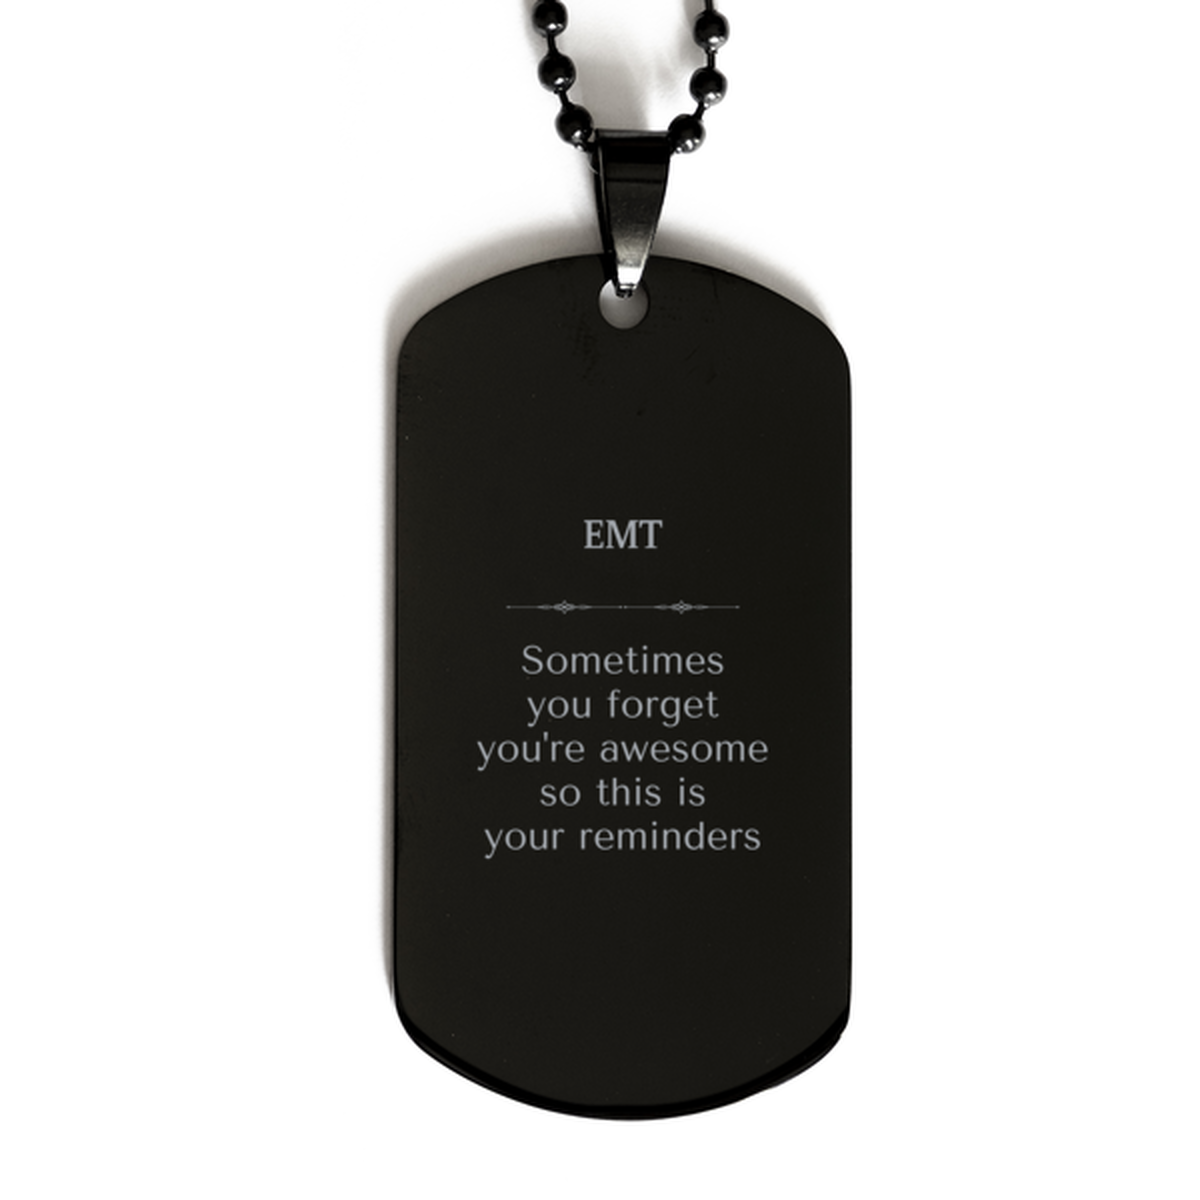 Sentimental EMT Black Dog Tag, EMT Sometimes you forget you're awesome so this is your reminders, Graduation Christmas Birthday Gifts for EMT, Men, Women, Coworkers